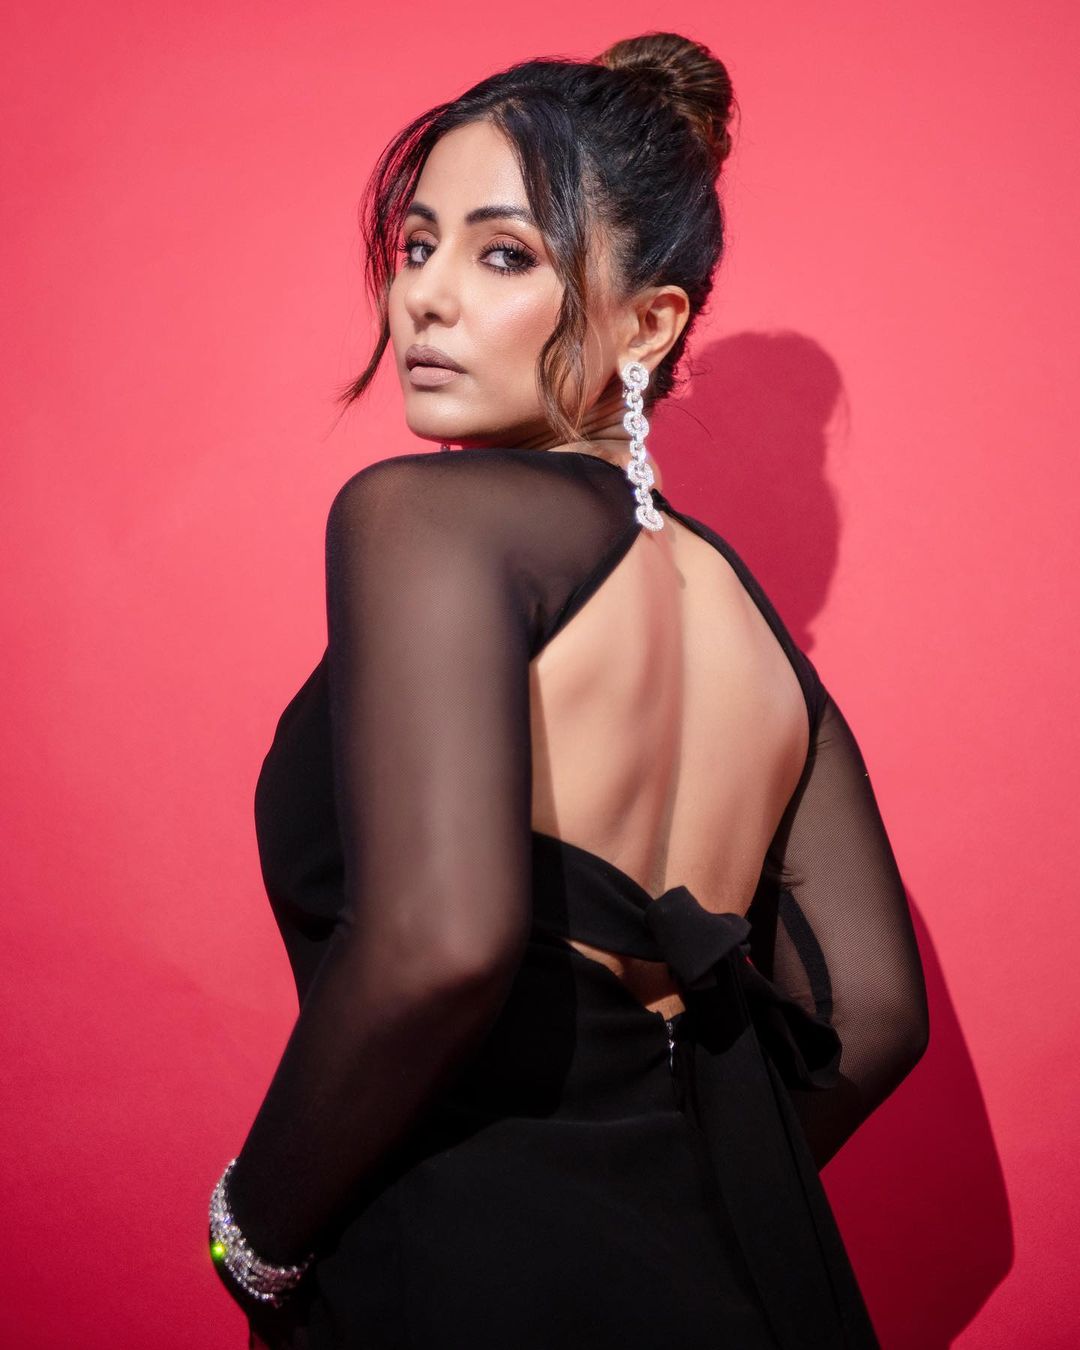 hina-khan-amazing-looks-in-black-out-fit